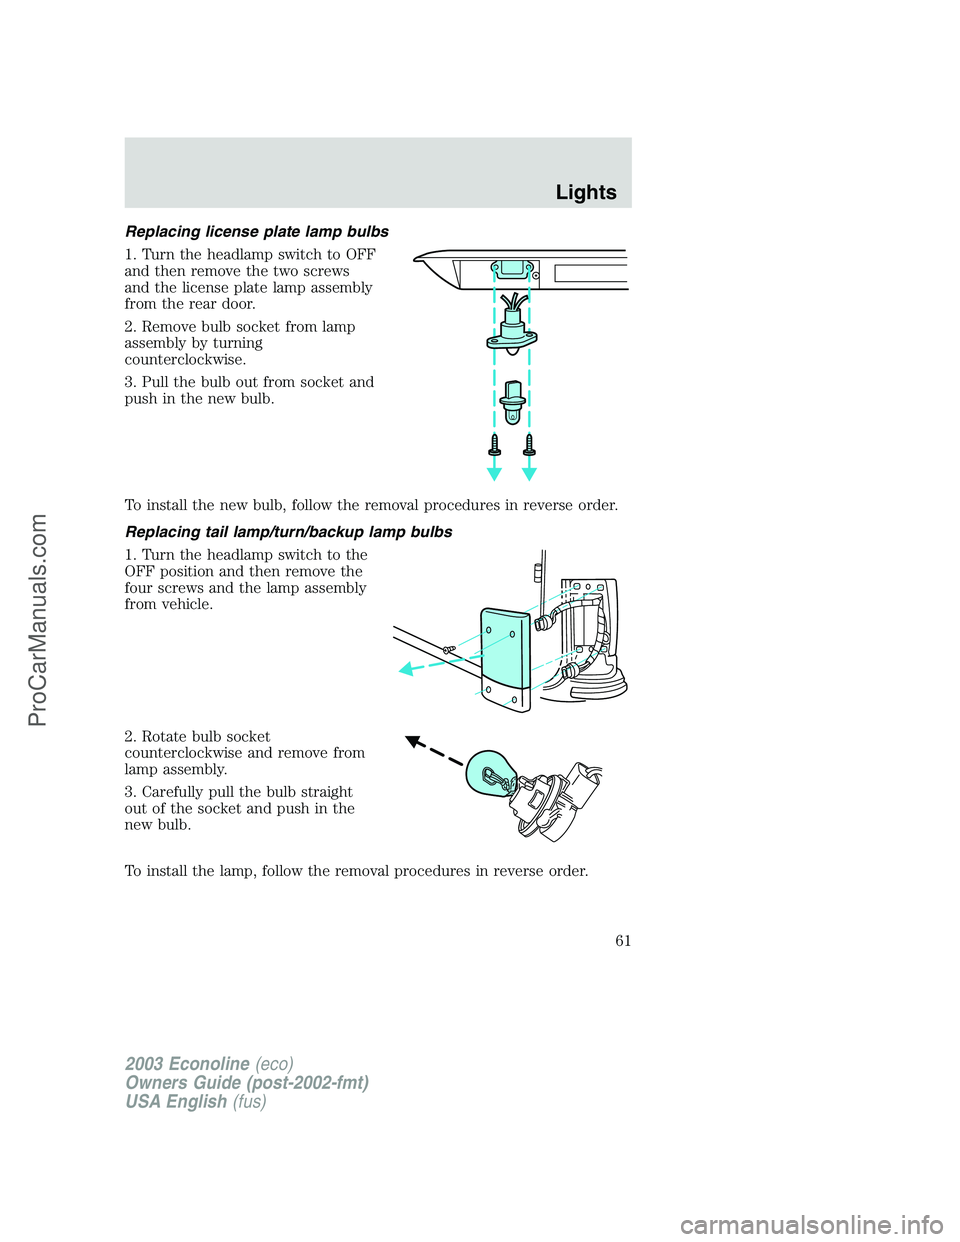 FORD E-450 2003  Owners Manual Replacing license plate lamp bulbs
1. Turn the headlamp switch to OFF
and then remove the two screws
and the license plate lamp assembly
from the rear door.
2. Remove bulb socket from lamp
assembly by